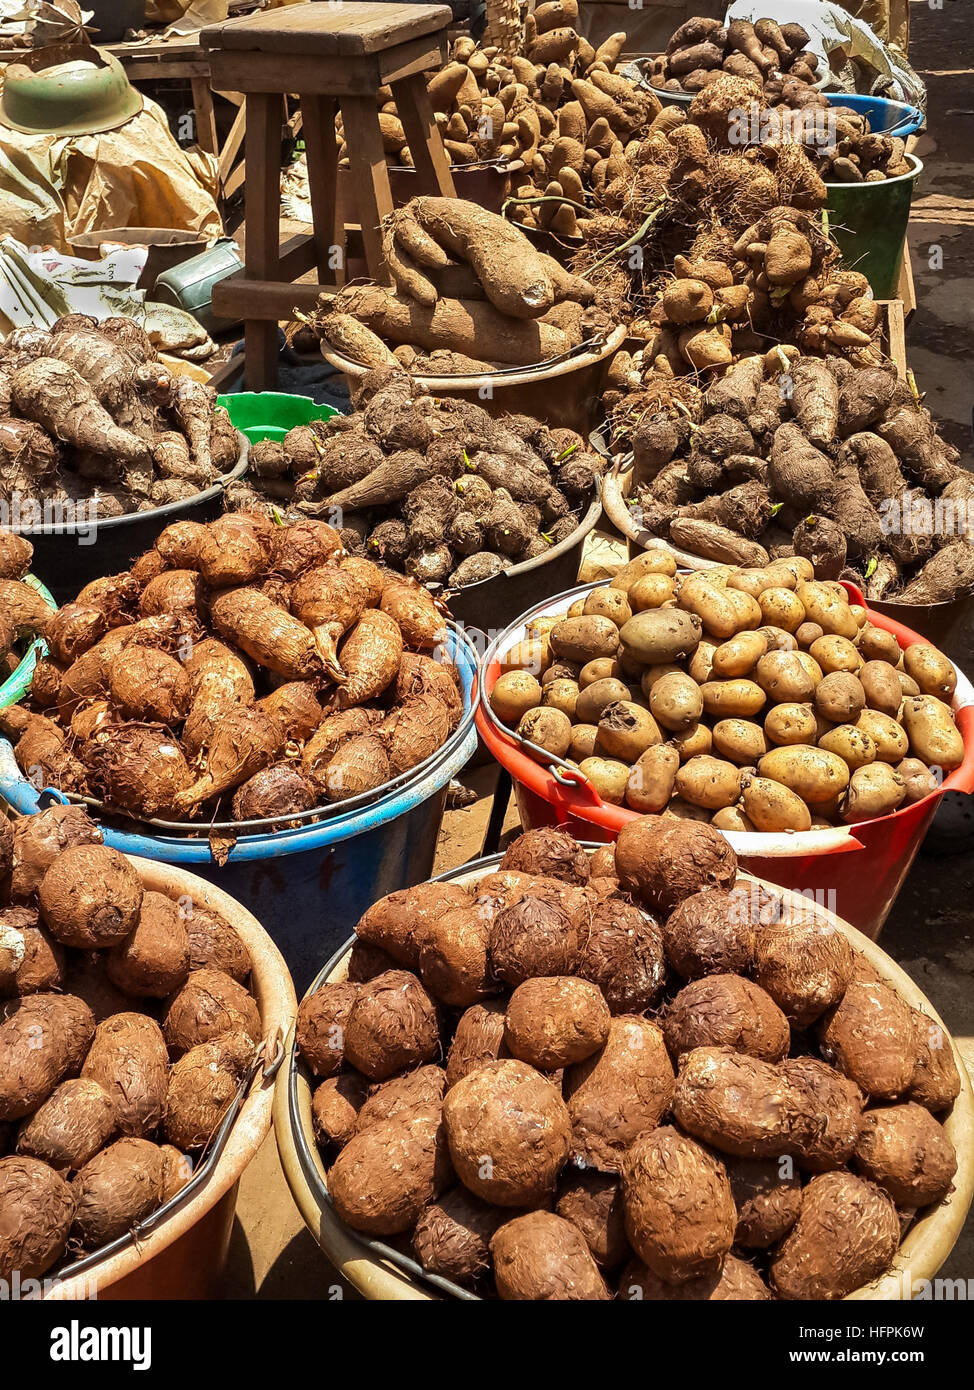 Different root vegetables and potatoes for sale from buckets on local market in Cameroon, Africa Stock Photo